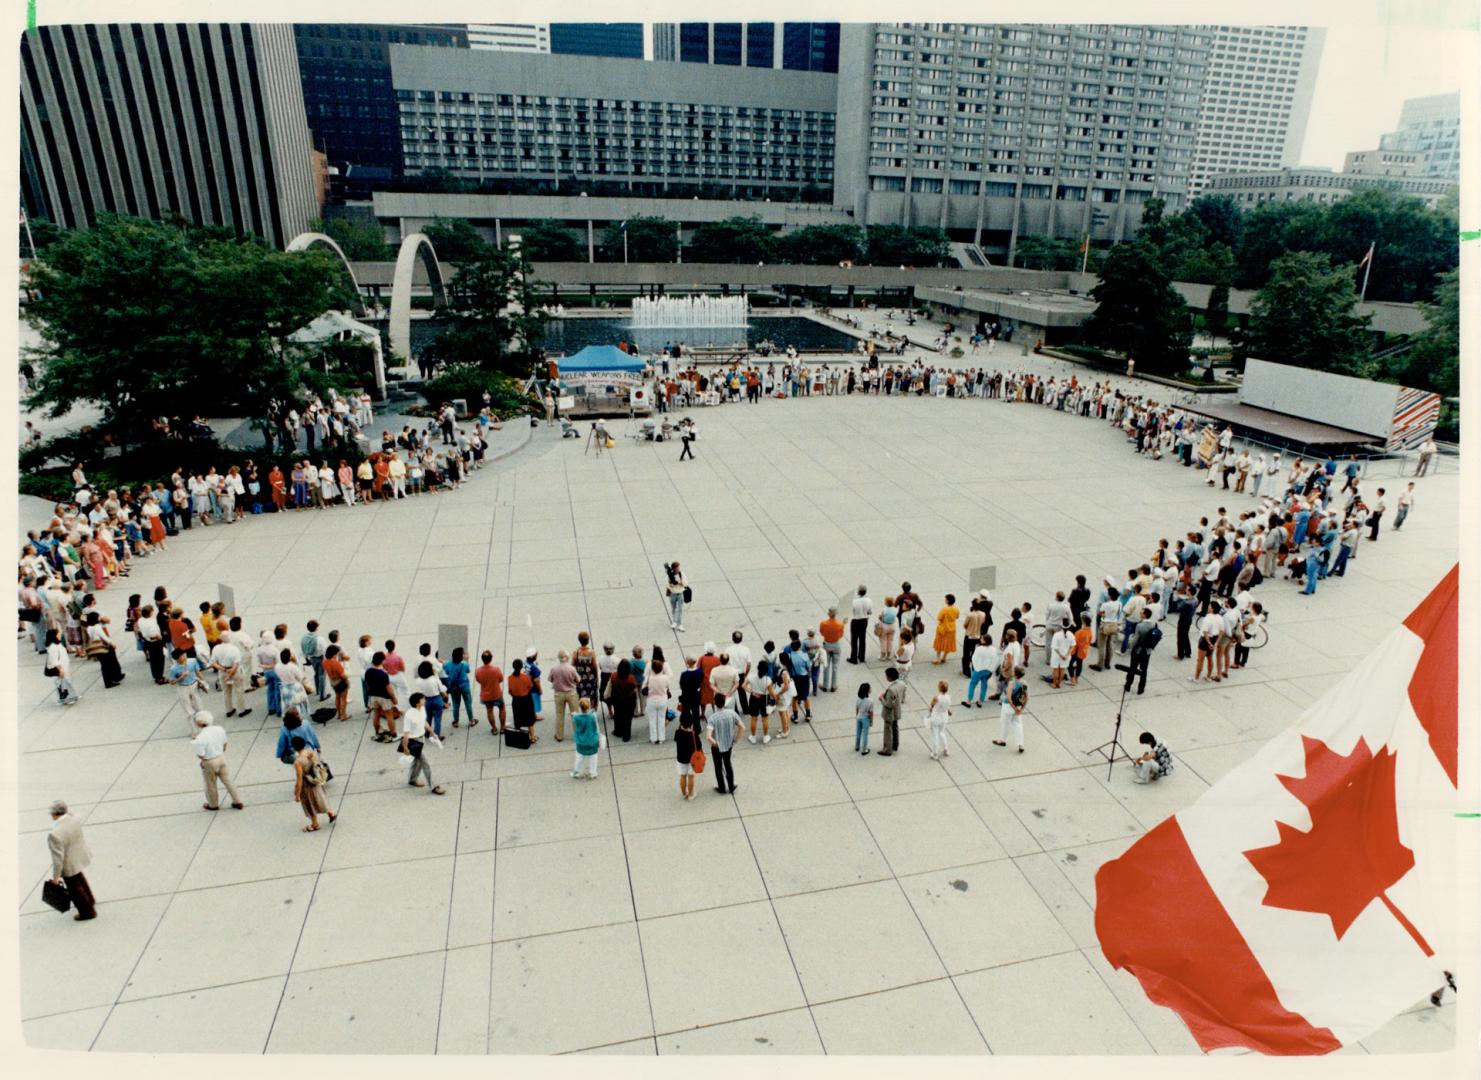 About 200 people gather in Nathan Phillips Square last night to mark 41st anniversary of the bombing of Hiroshima